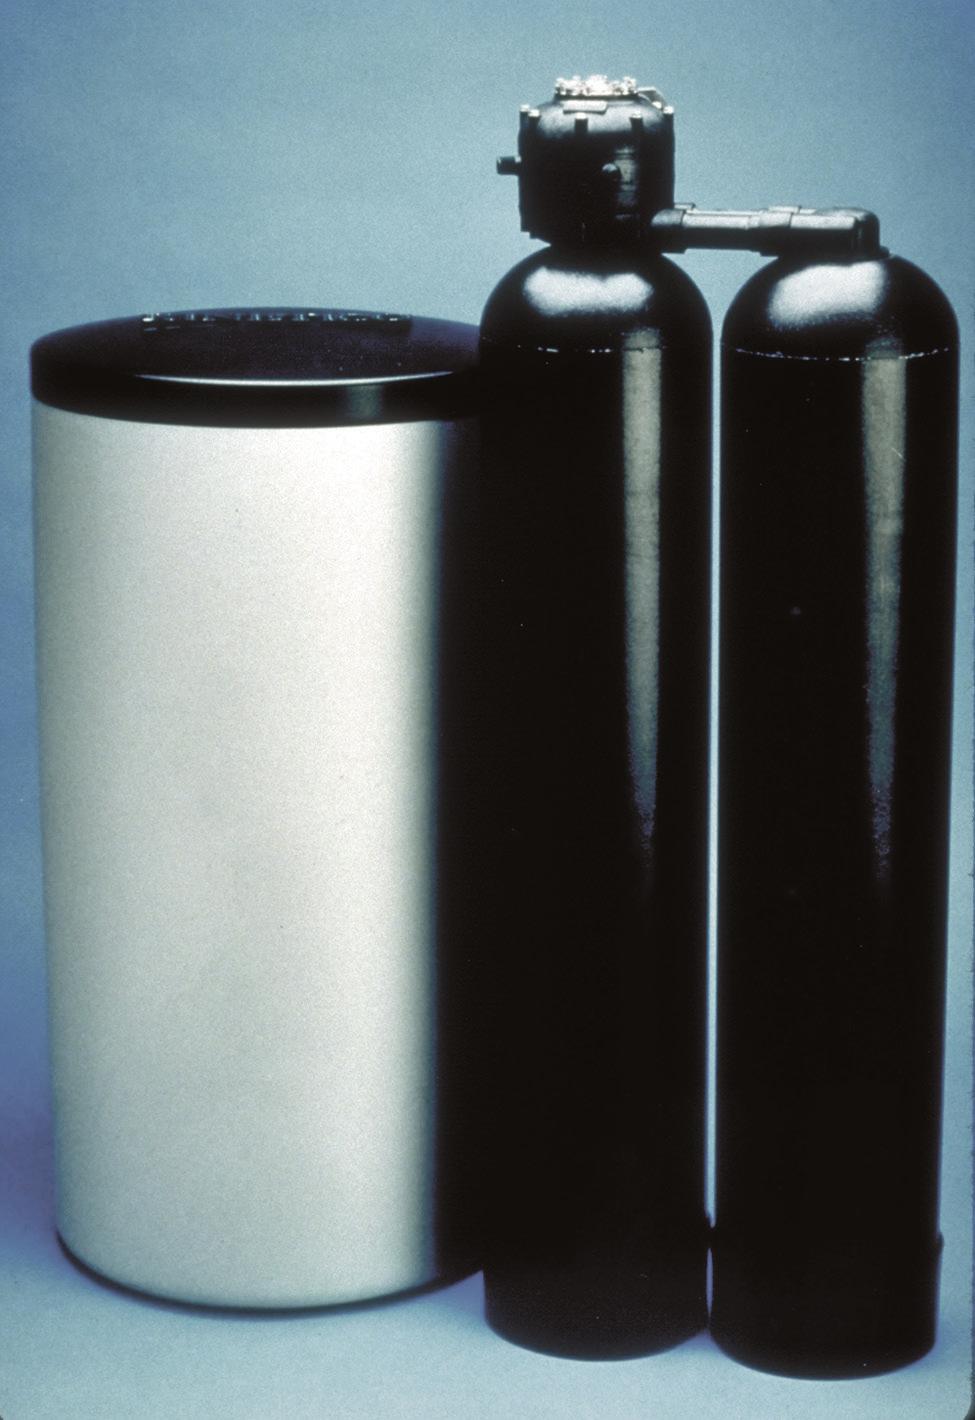 WATER FILTERS AND SOFTENERS Automatic water softeners use the most water, because they have a timer that automatically initiates the regeneration cycle whether or not the water is